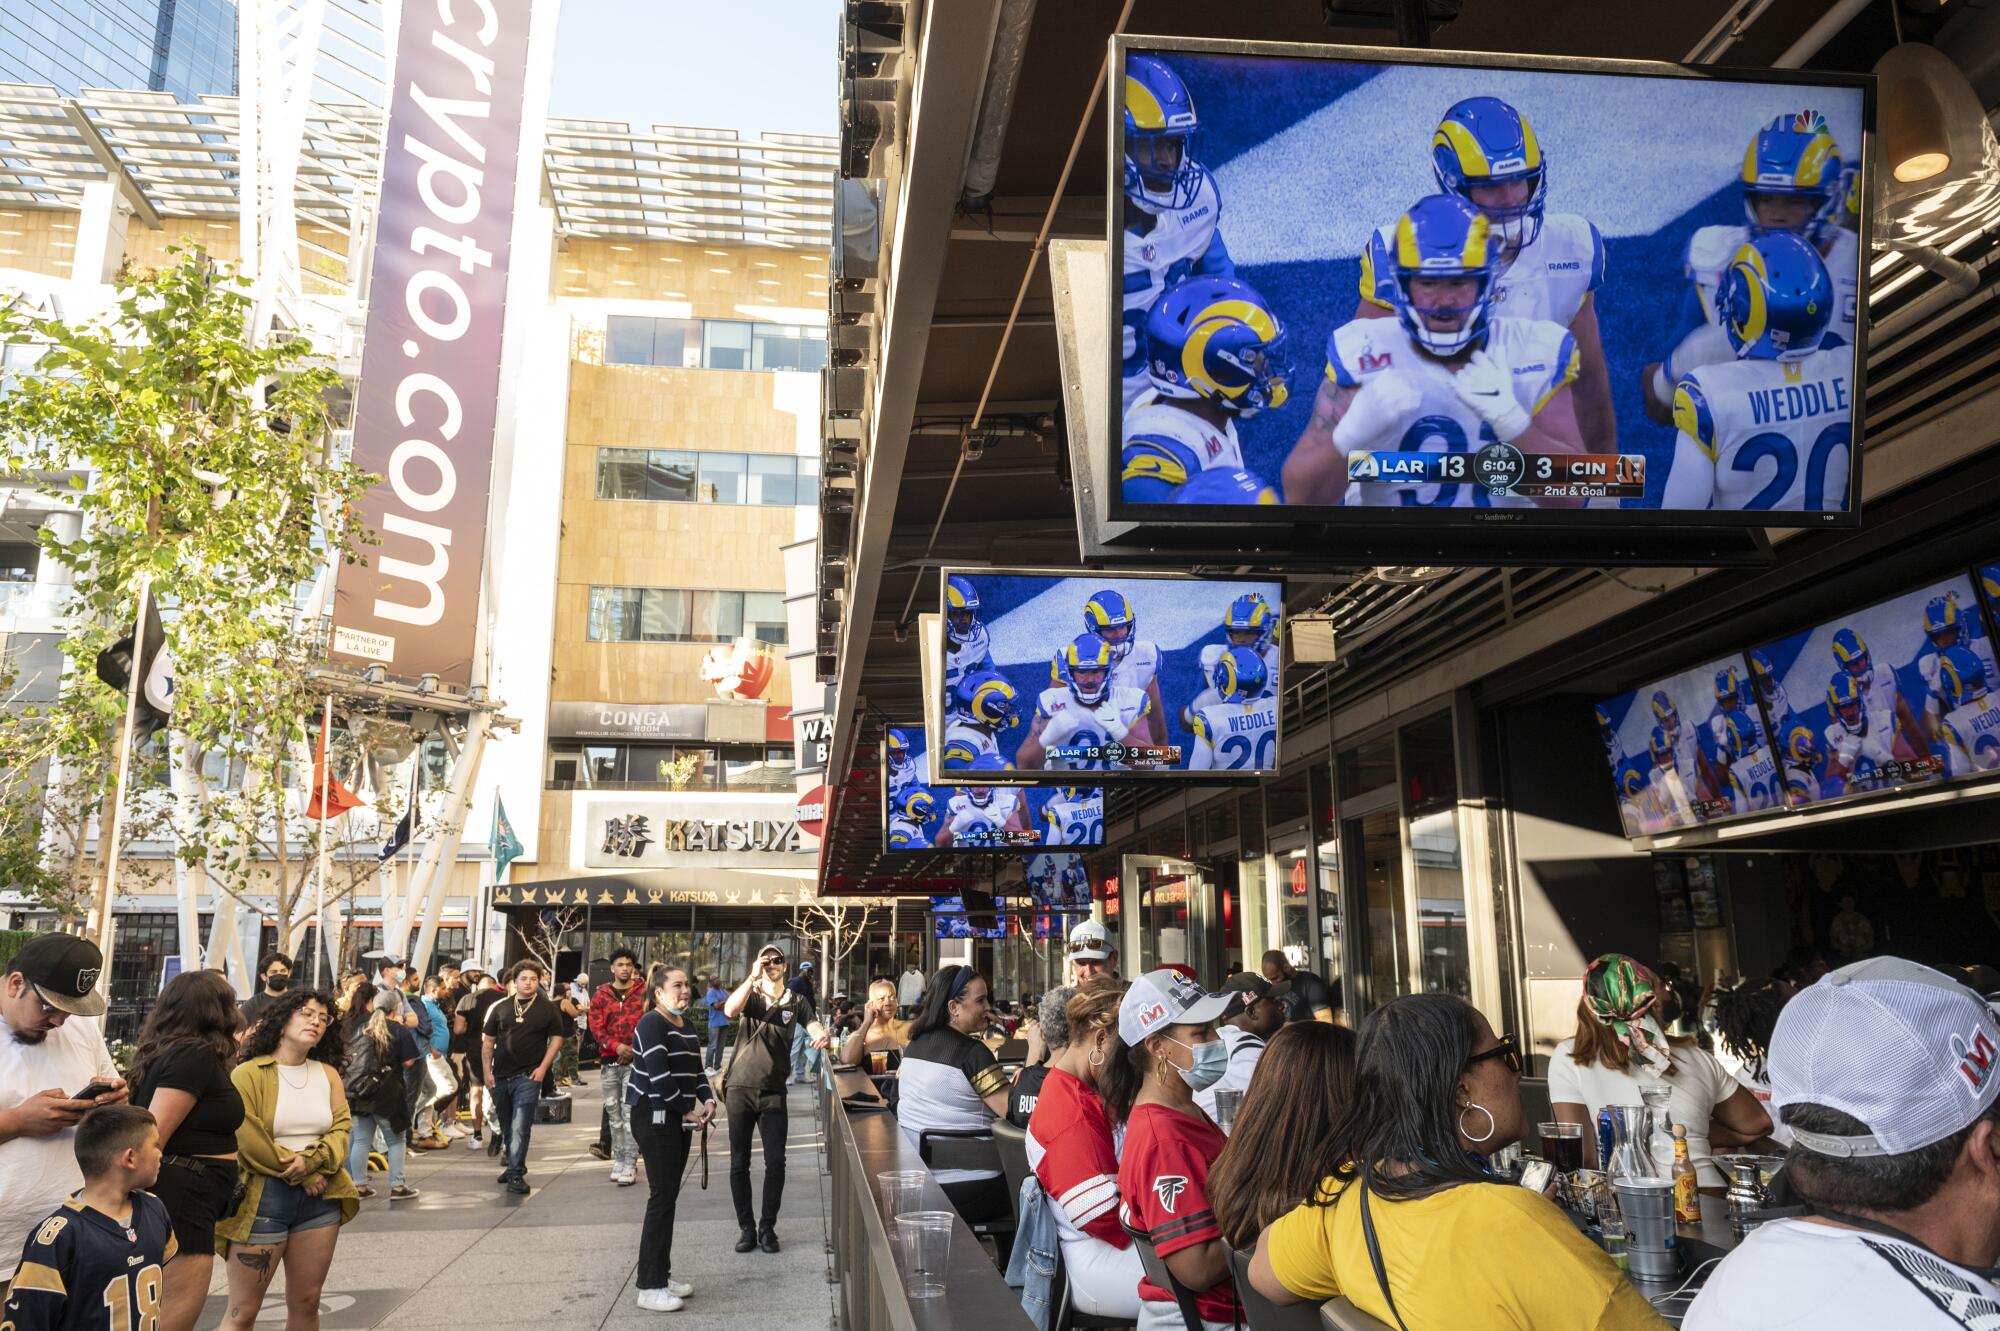 Spectators watch the Rams and Bengals play during the Super Bowl at Tom's Watch Bar at L.A. Live in Downtown Los Angeles.